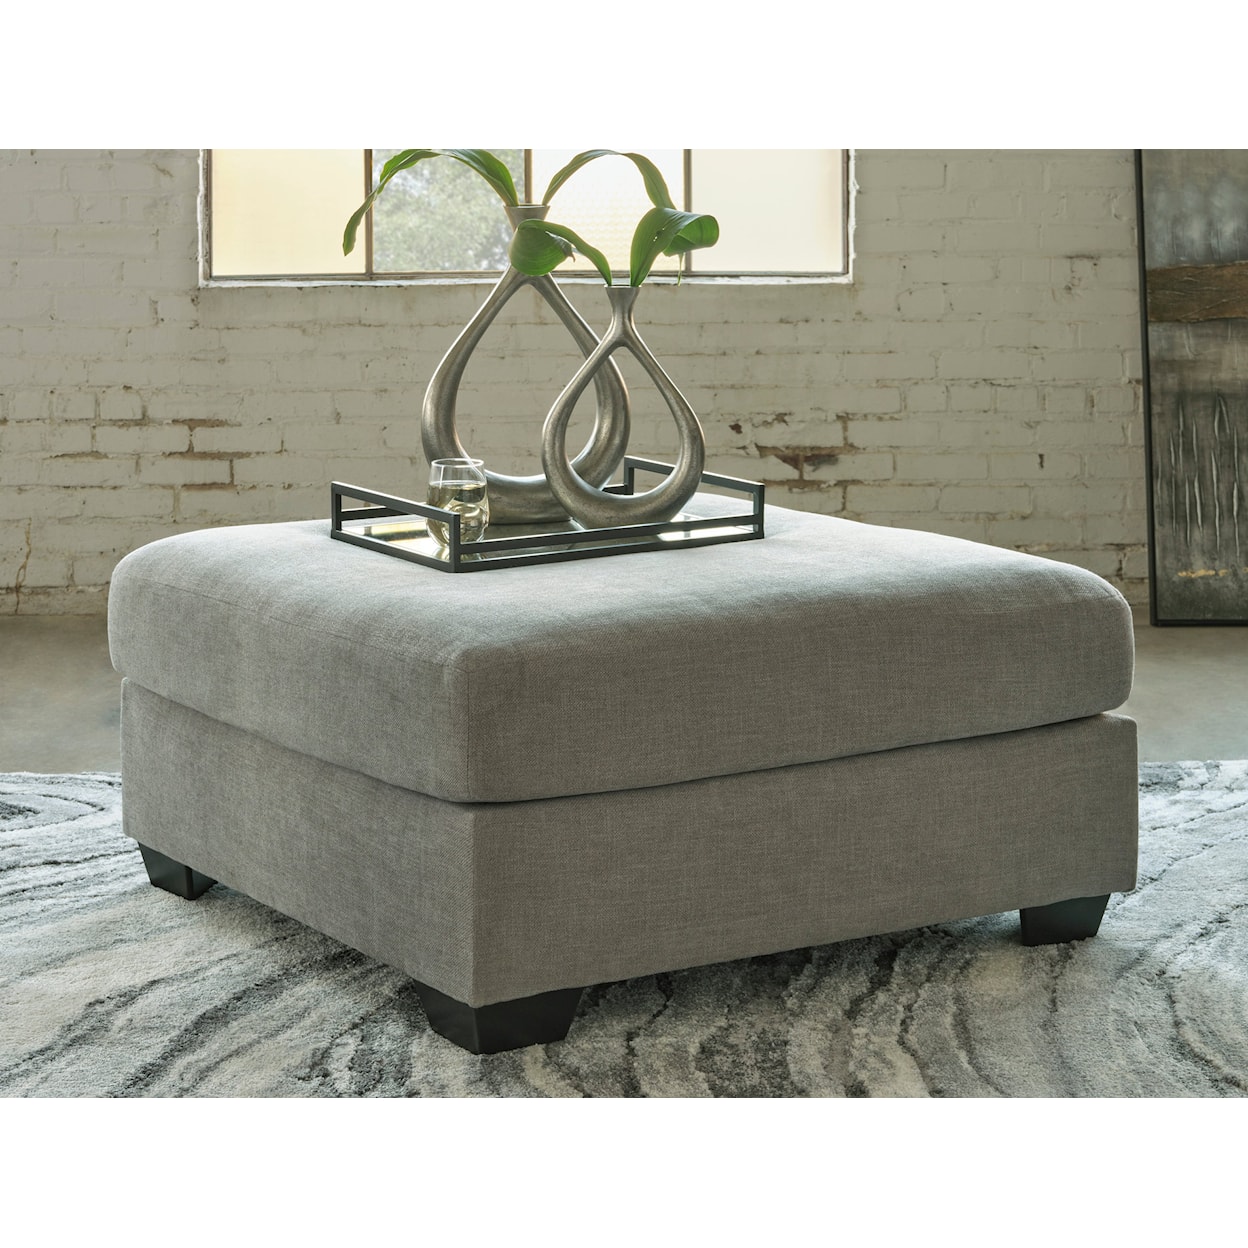 Signature Design by Ashley Furniture Keener Oversized Accent Ottoman